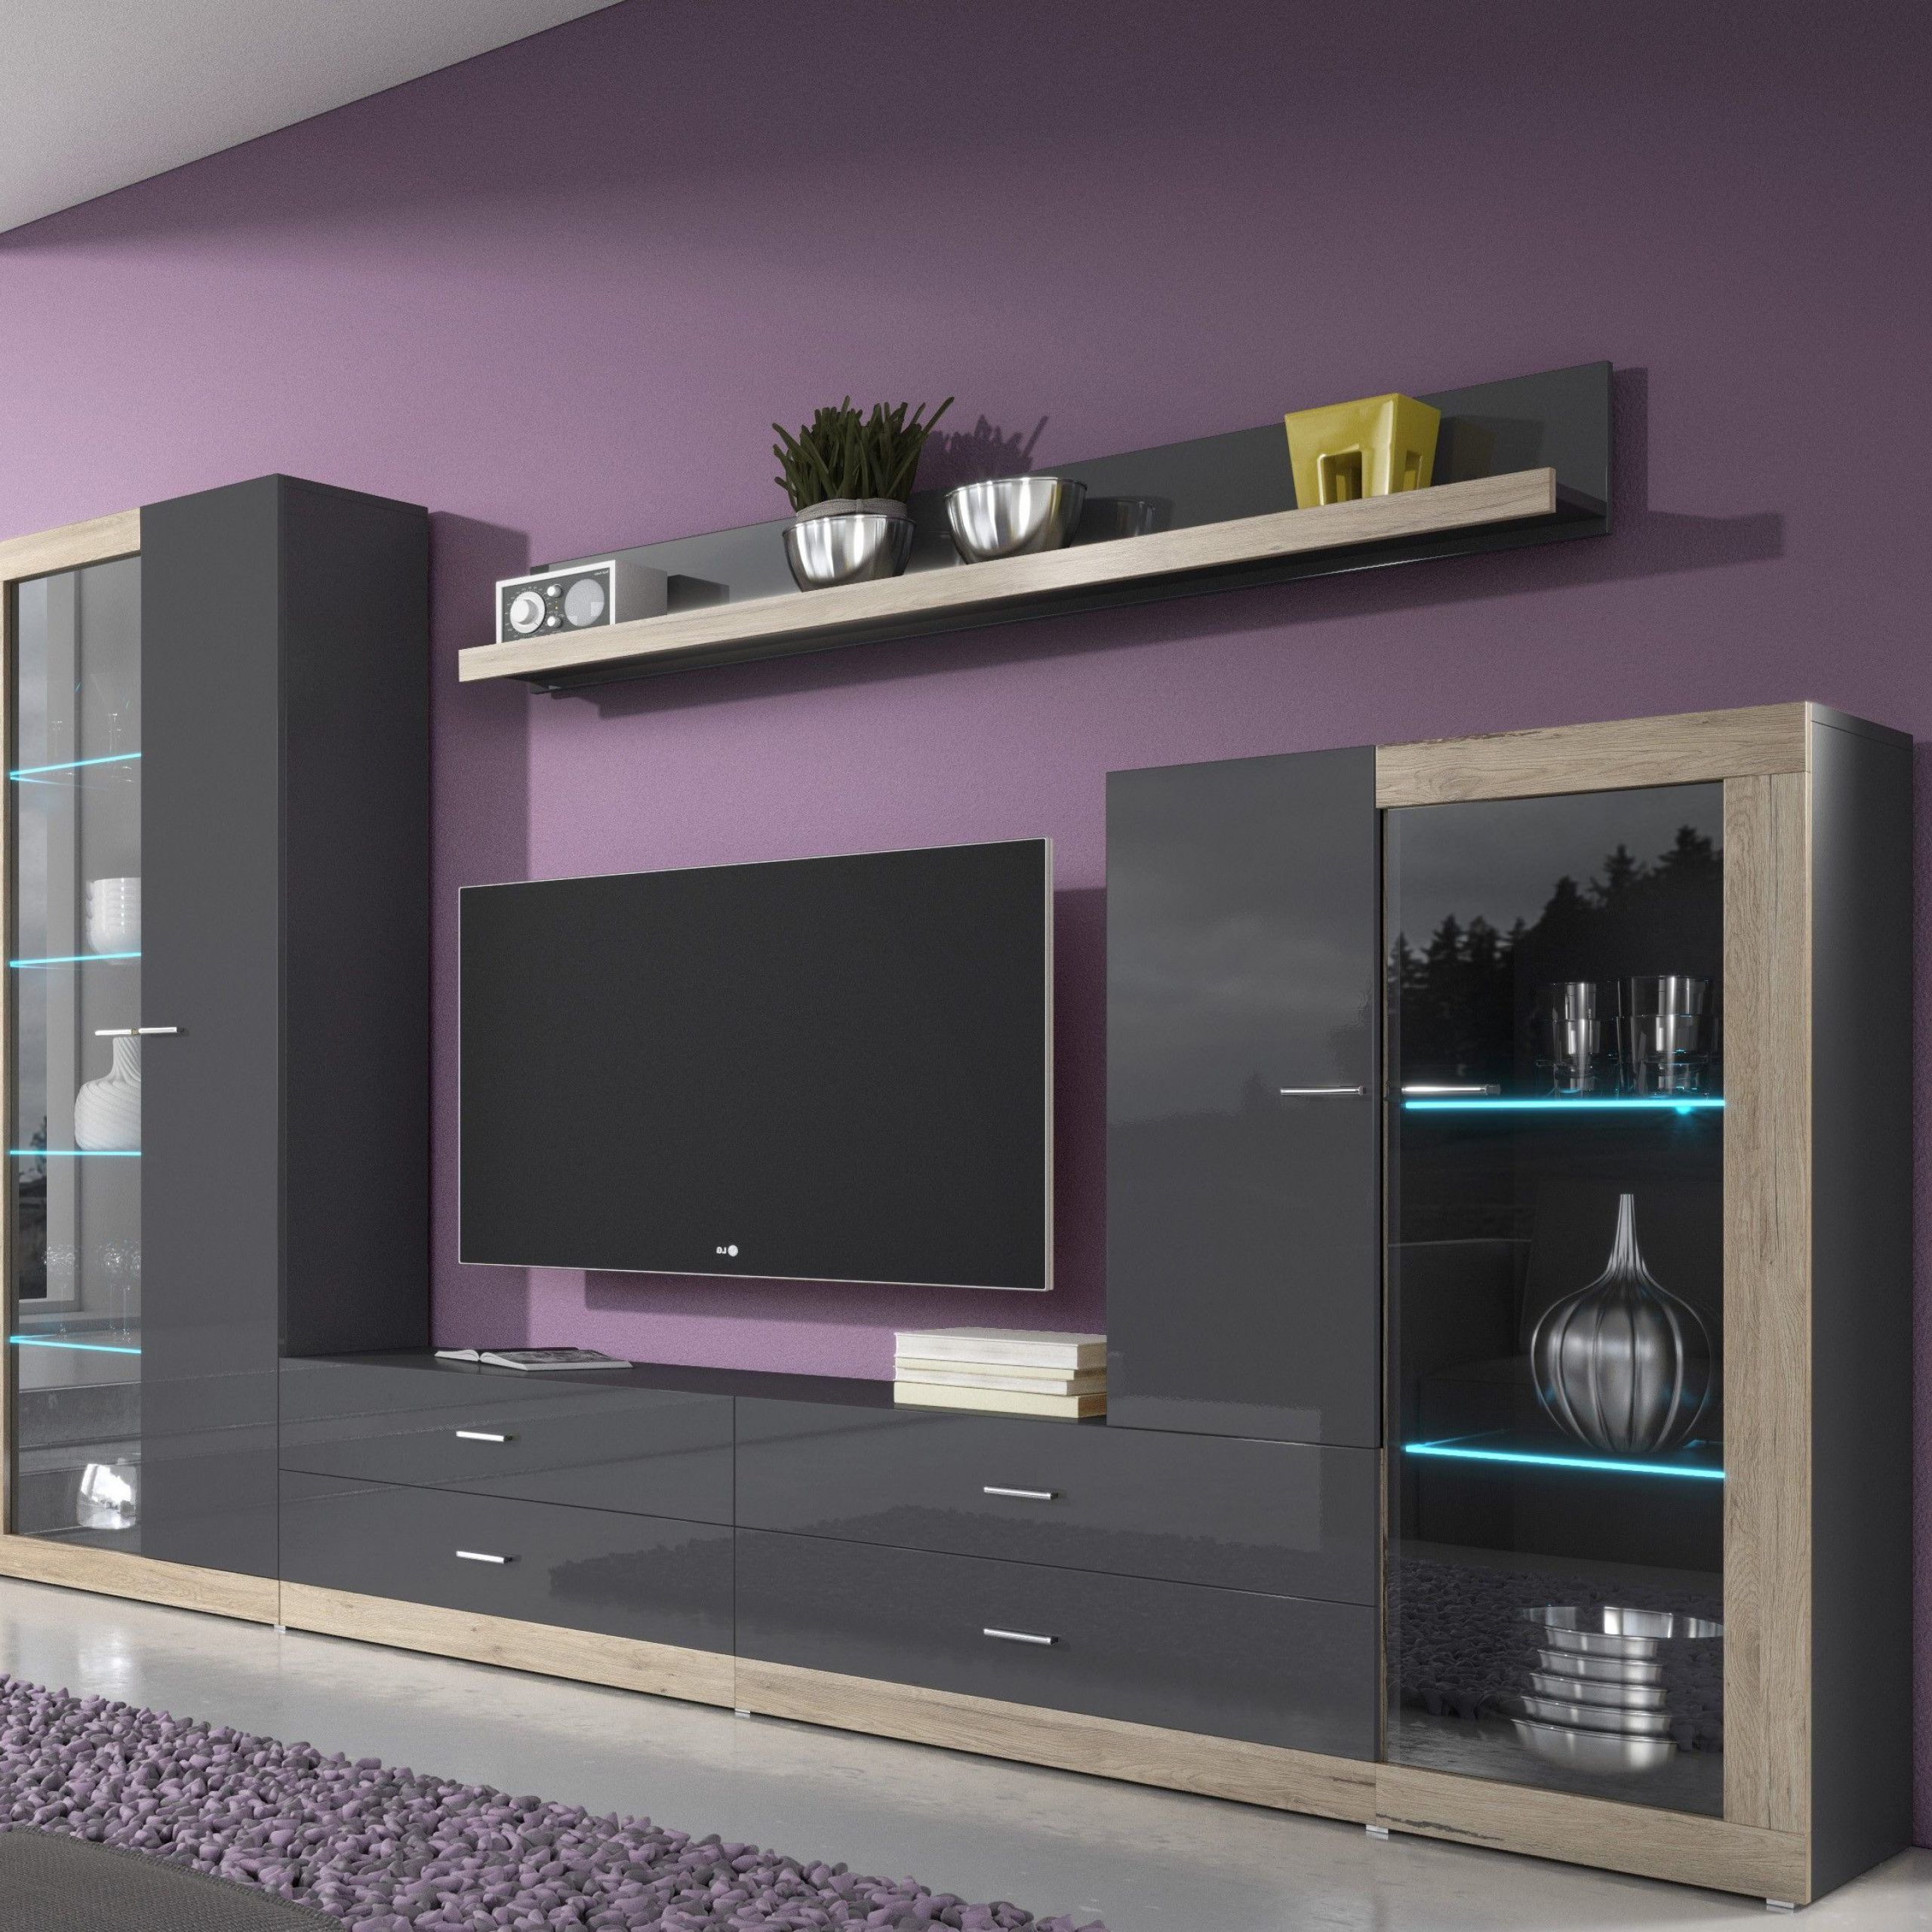 Wall Unit Tessa 1 | Living Room Wall Units, Bedroom Wall With Regard To High Glass Modern Entertainment Tv Stands For Living Room Bedroom (Gallery 14 of 20)